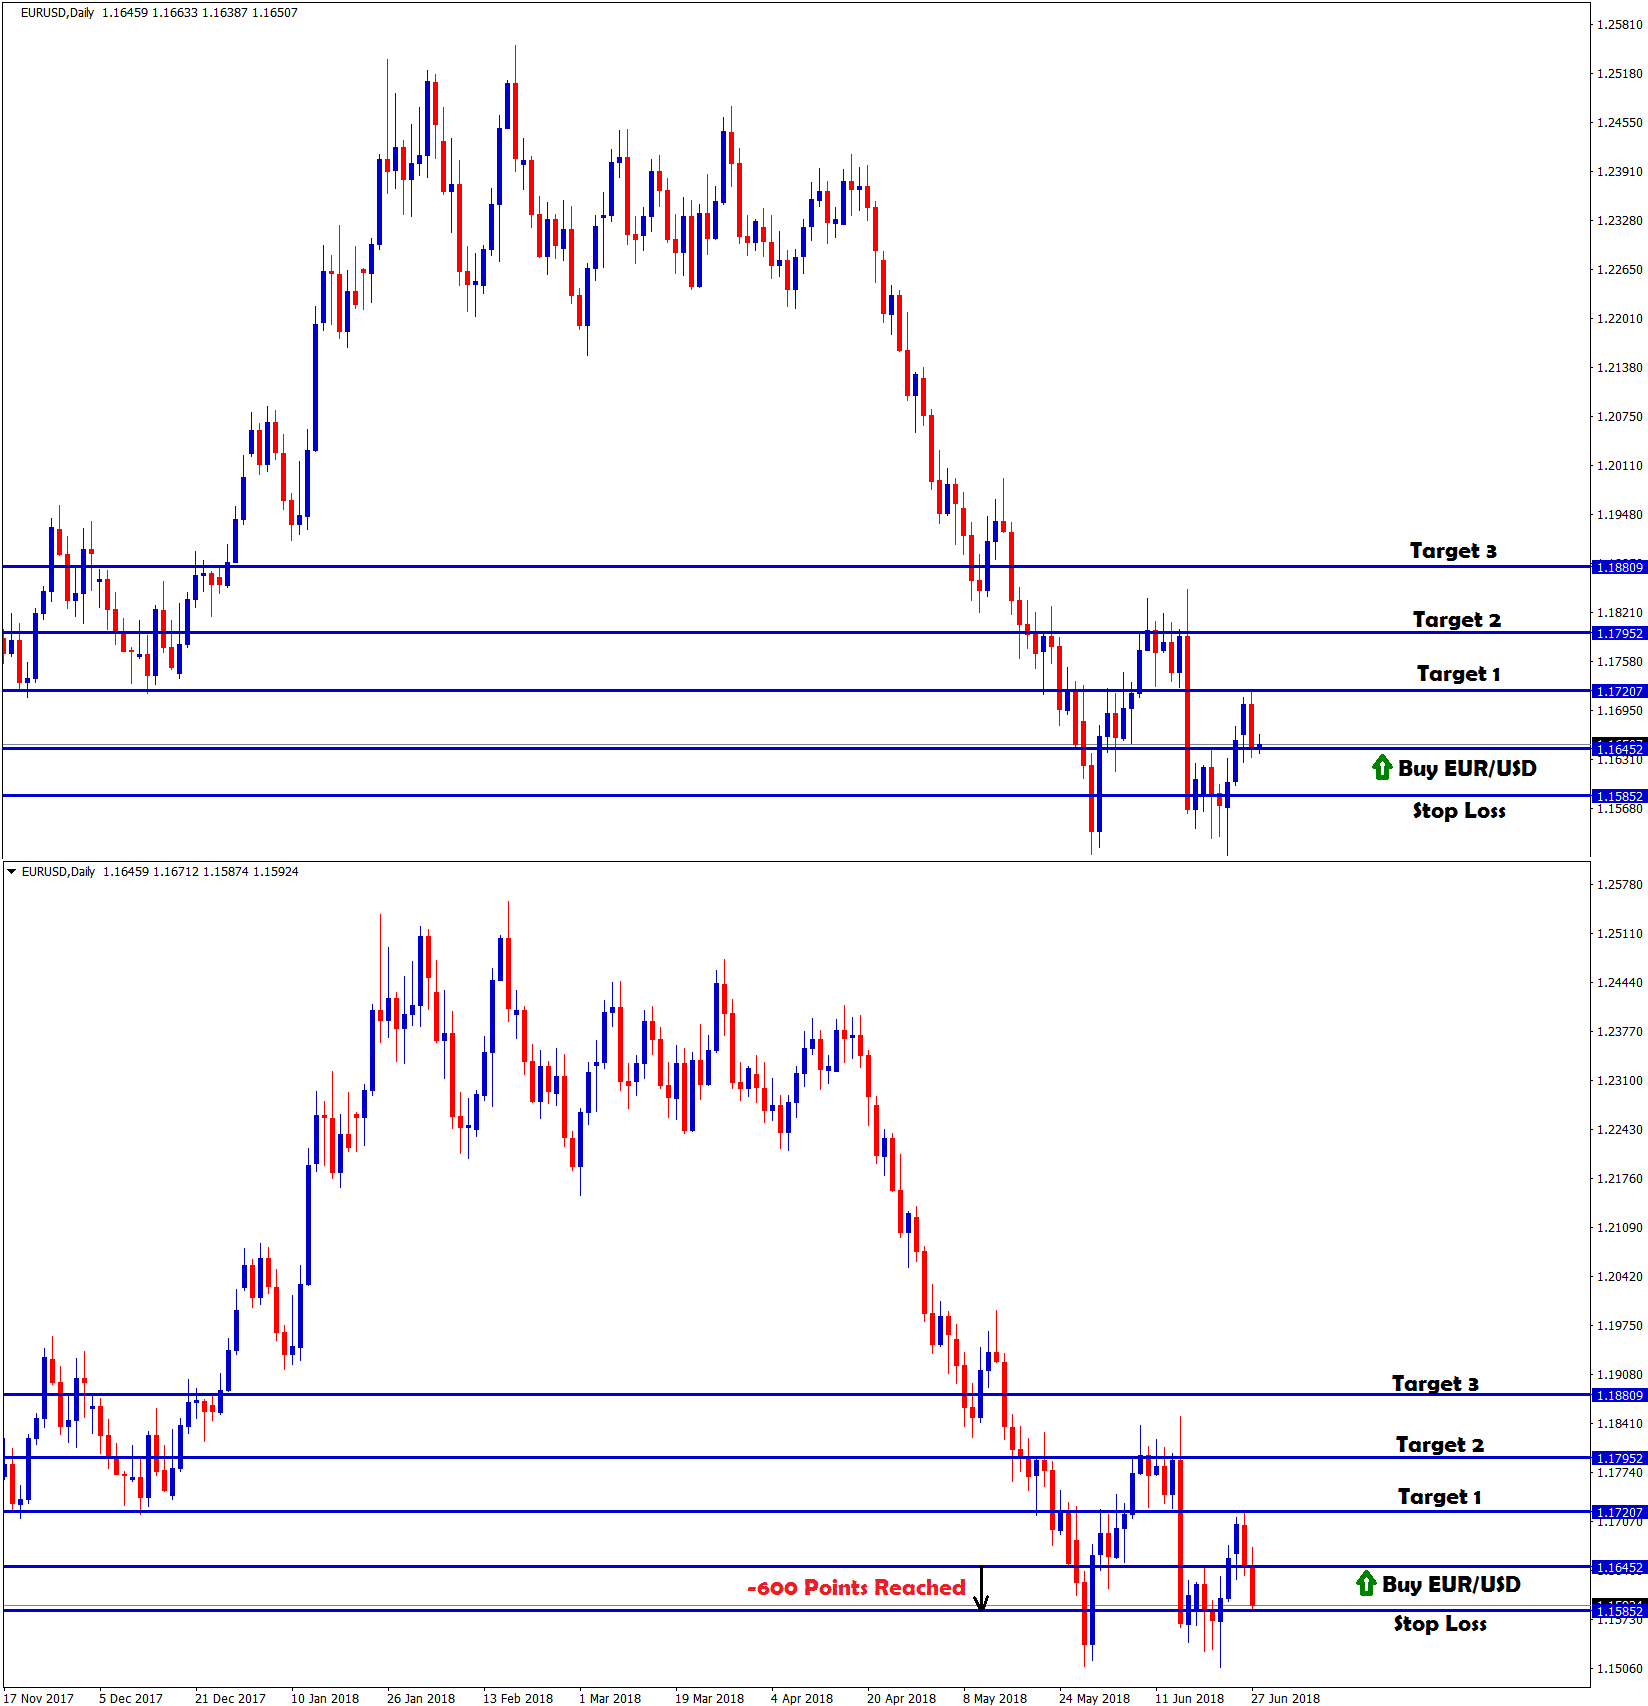 eur usd buy signal hits stop loss with -600 points loss